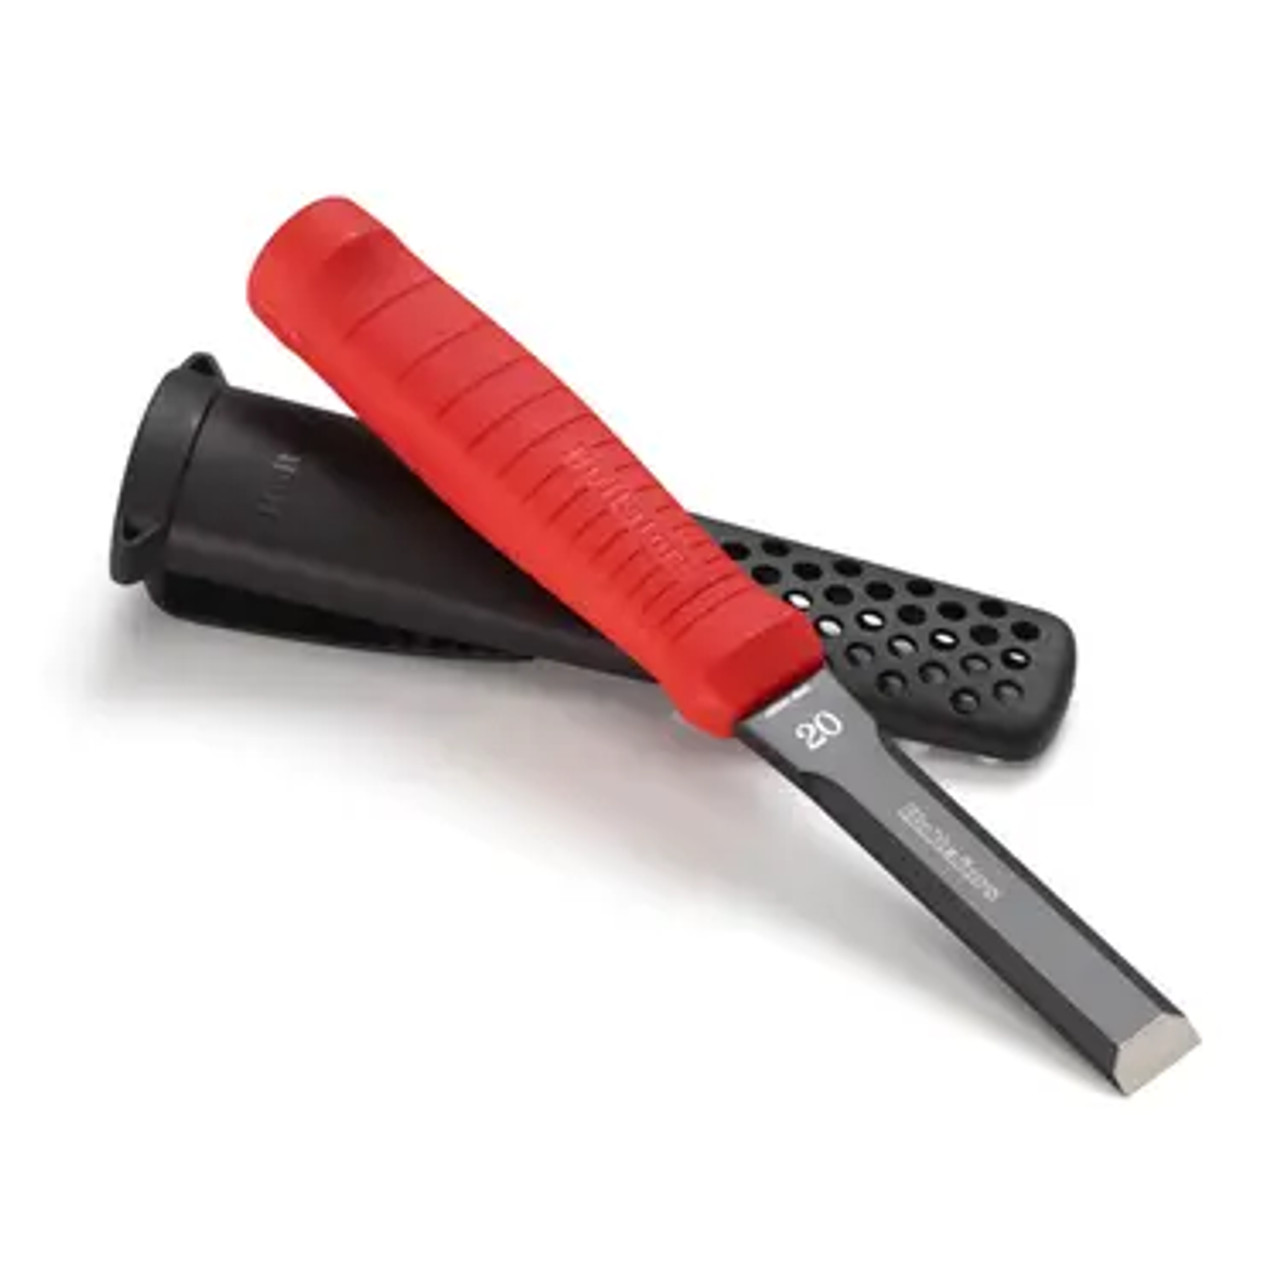 HULTAFORS Chisels EDC with Standard Chisel  for Woodworkers that have Standard Chisel  available in Australia and New Zealand